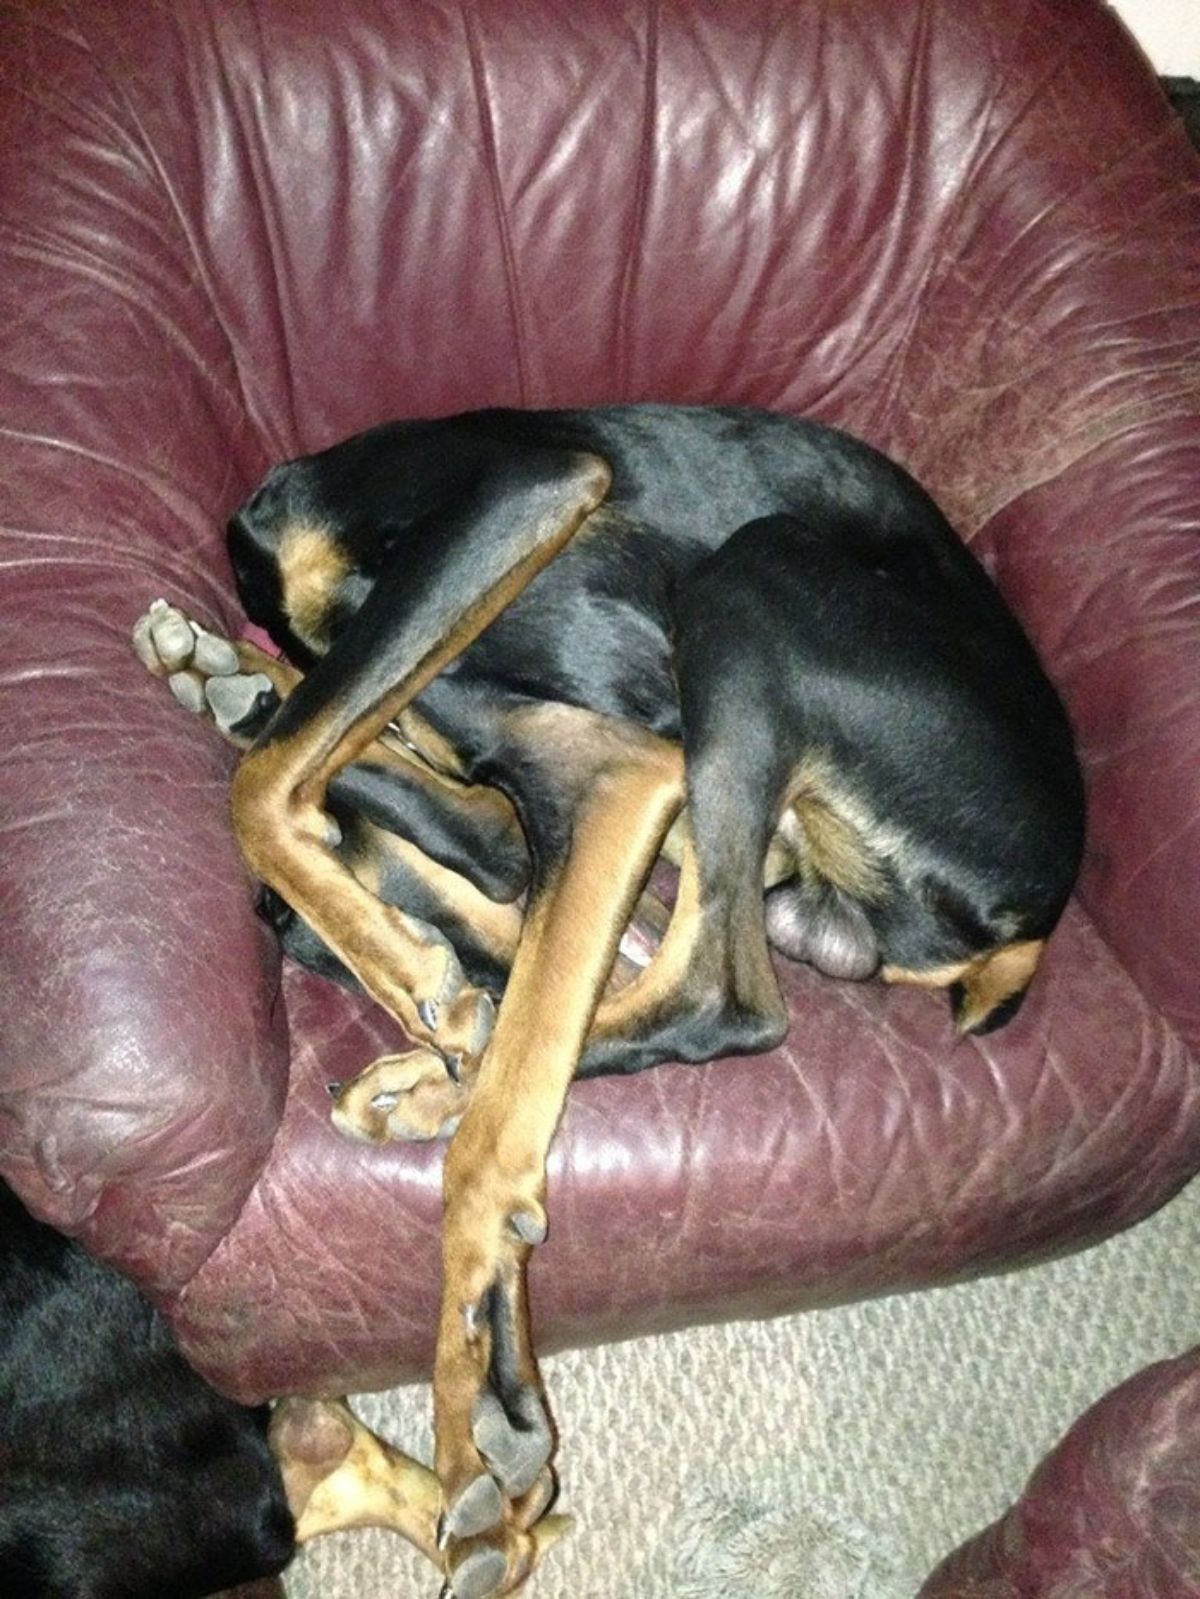 black and brown dog sleeping on a red chair in a contorted position